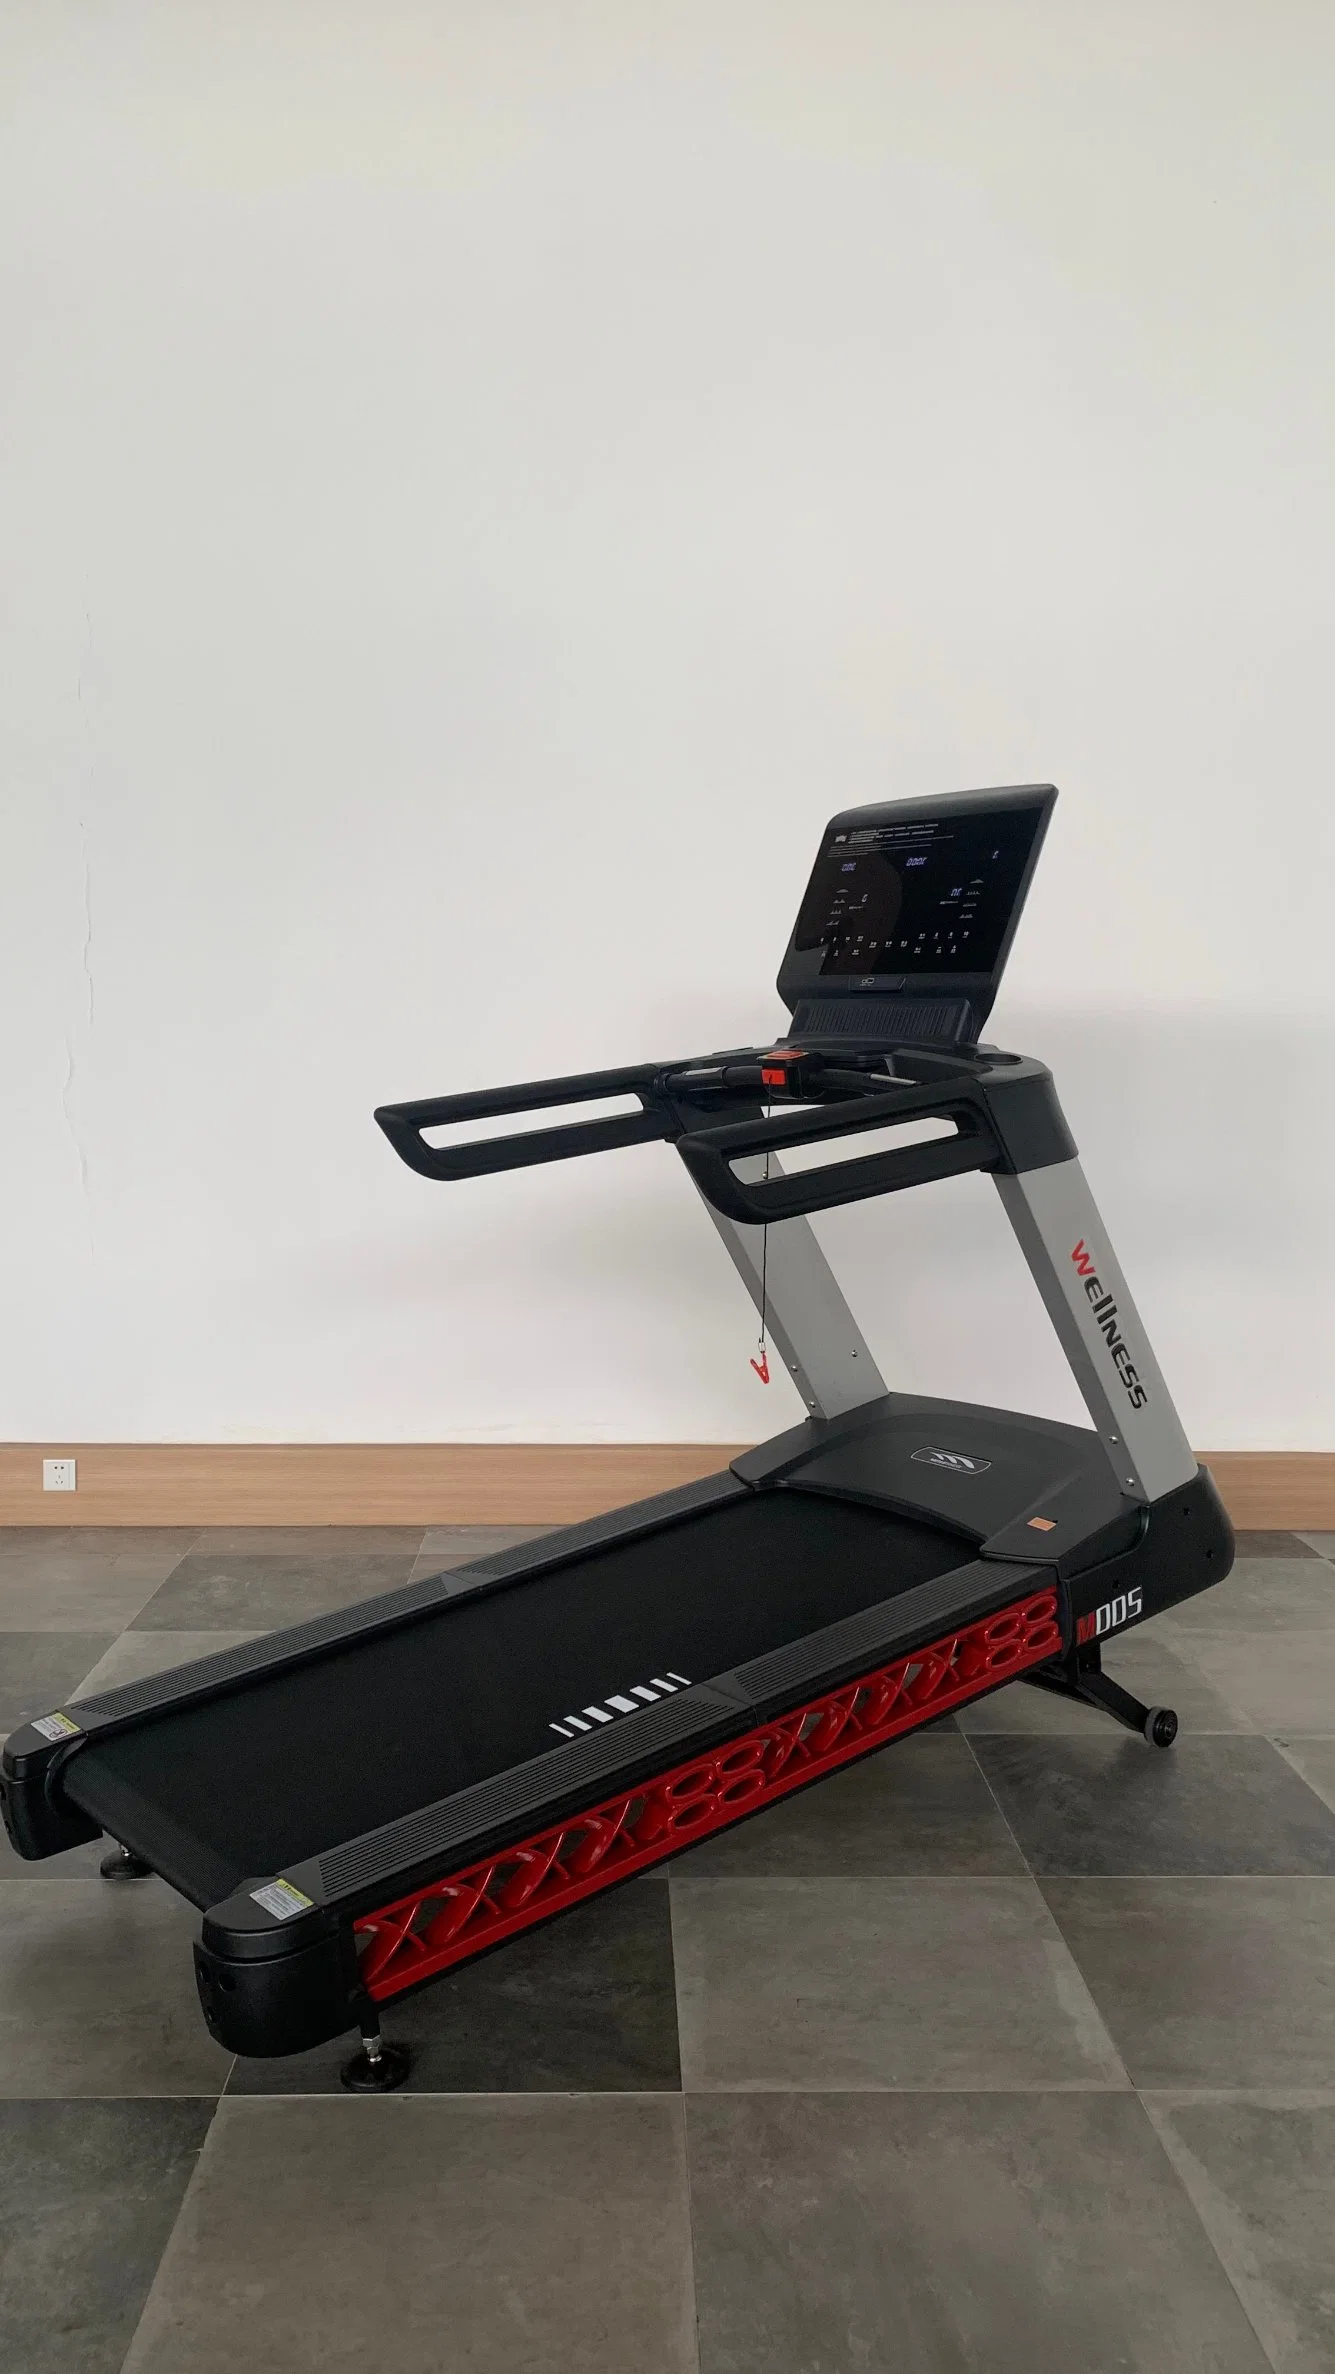 Hot Sale Professional Treadmill/Gym Treadmill/Exercise Equipment with Competitive Price